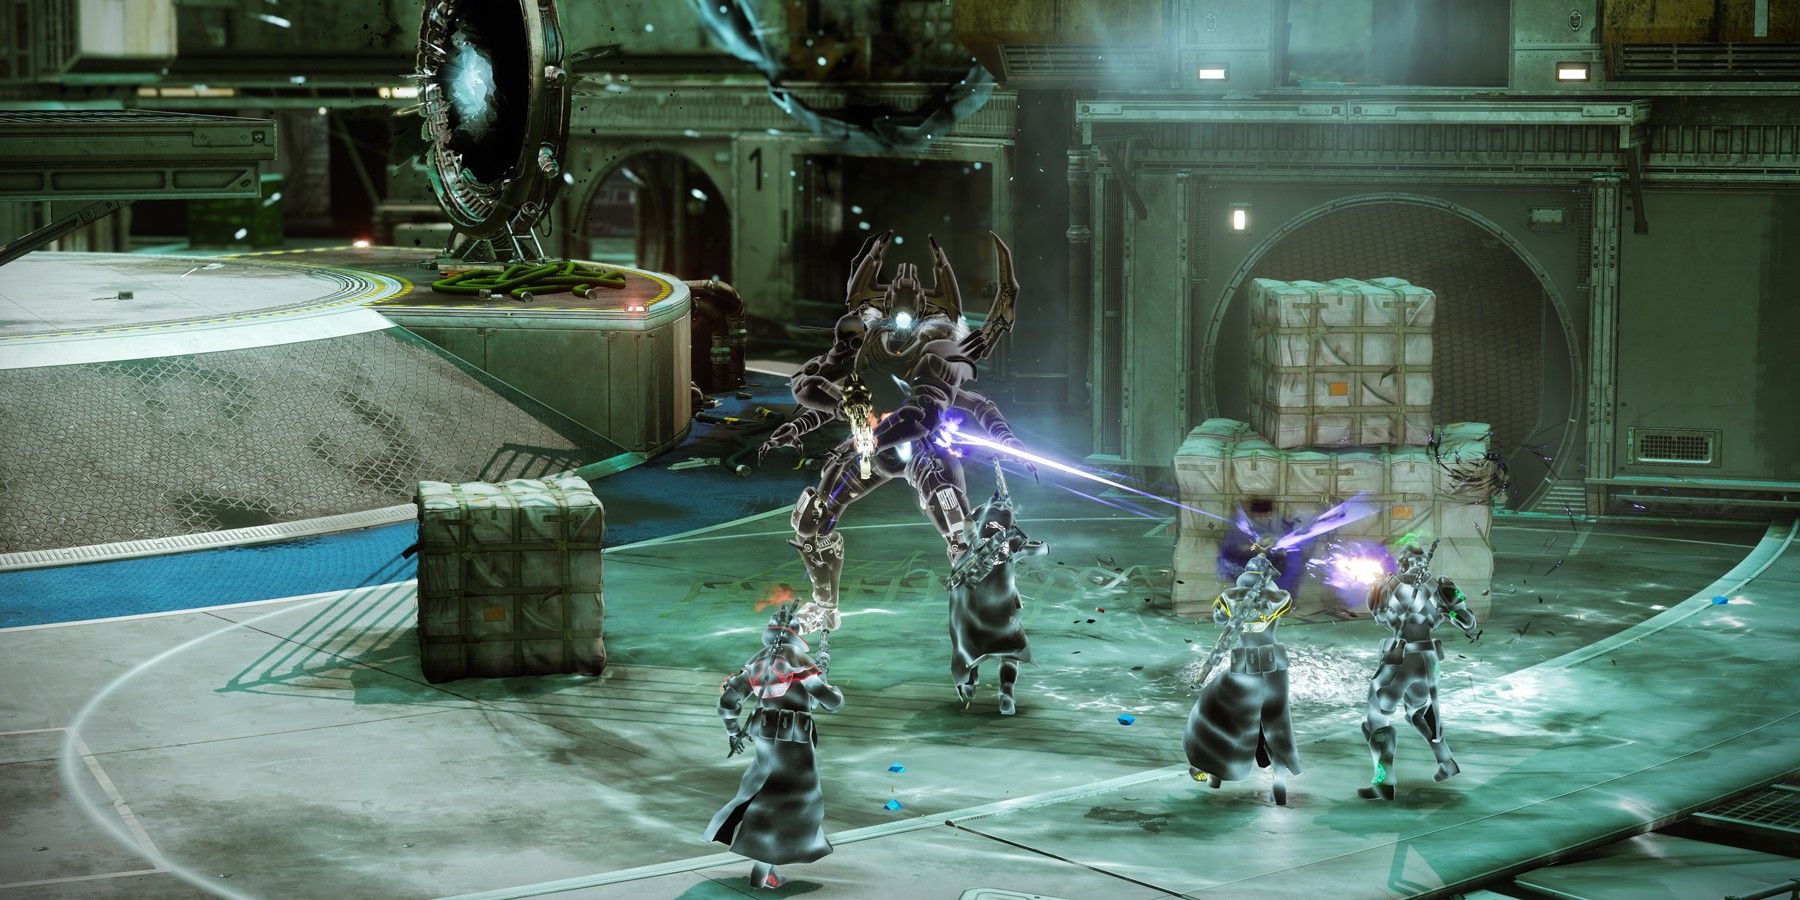 Four Guardians are fighting the boss in Gambit